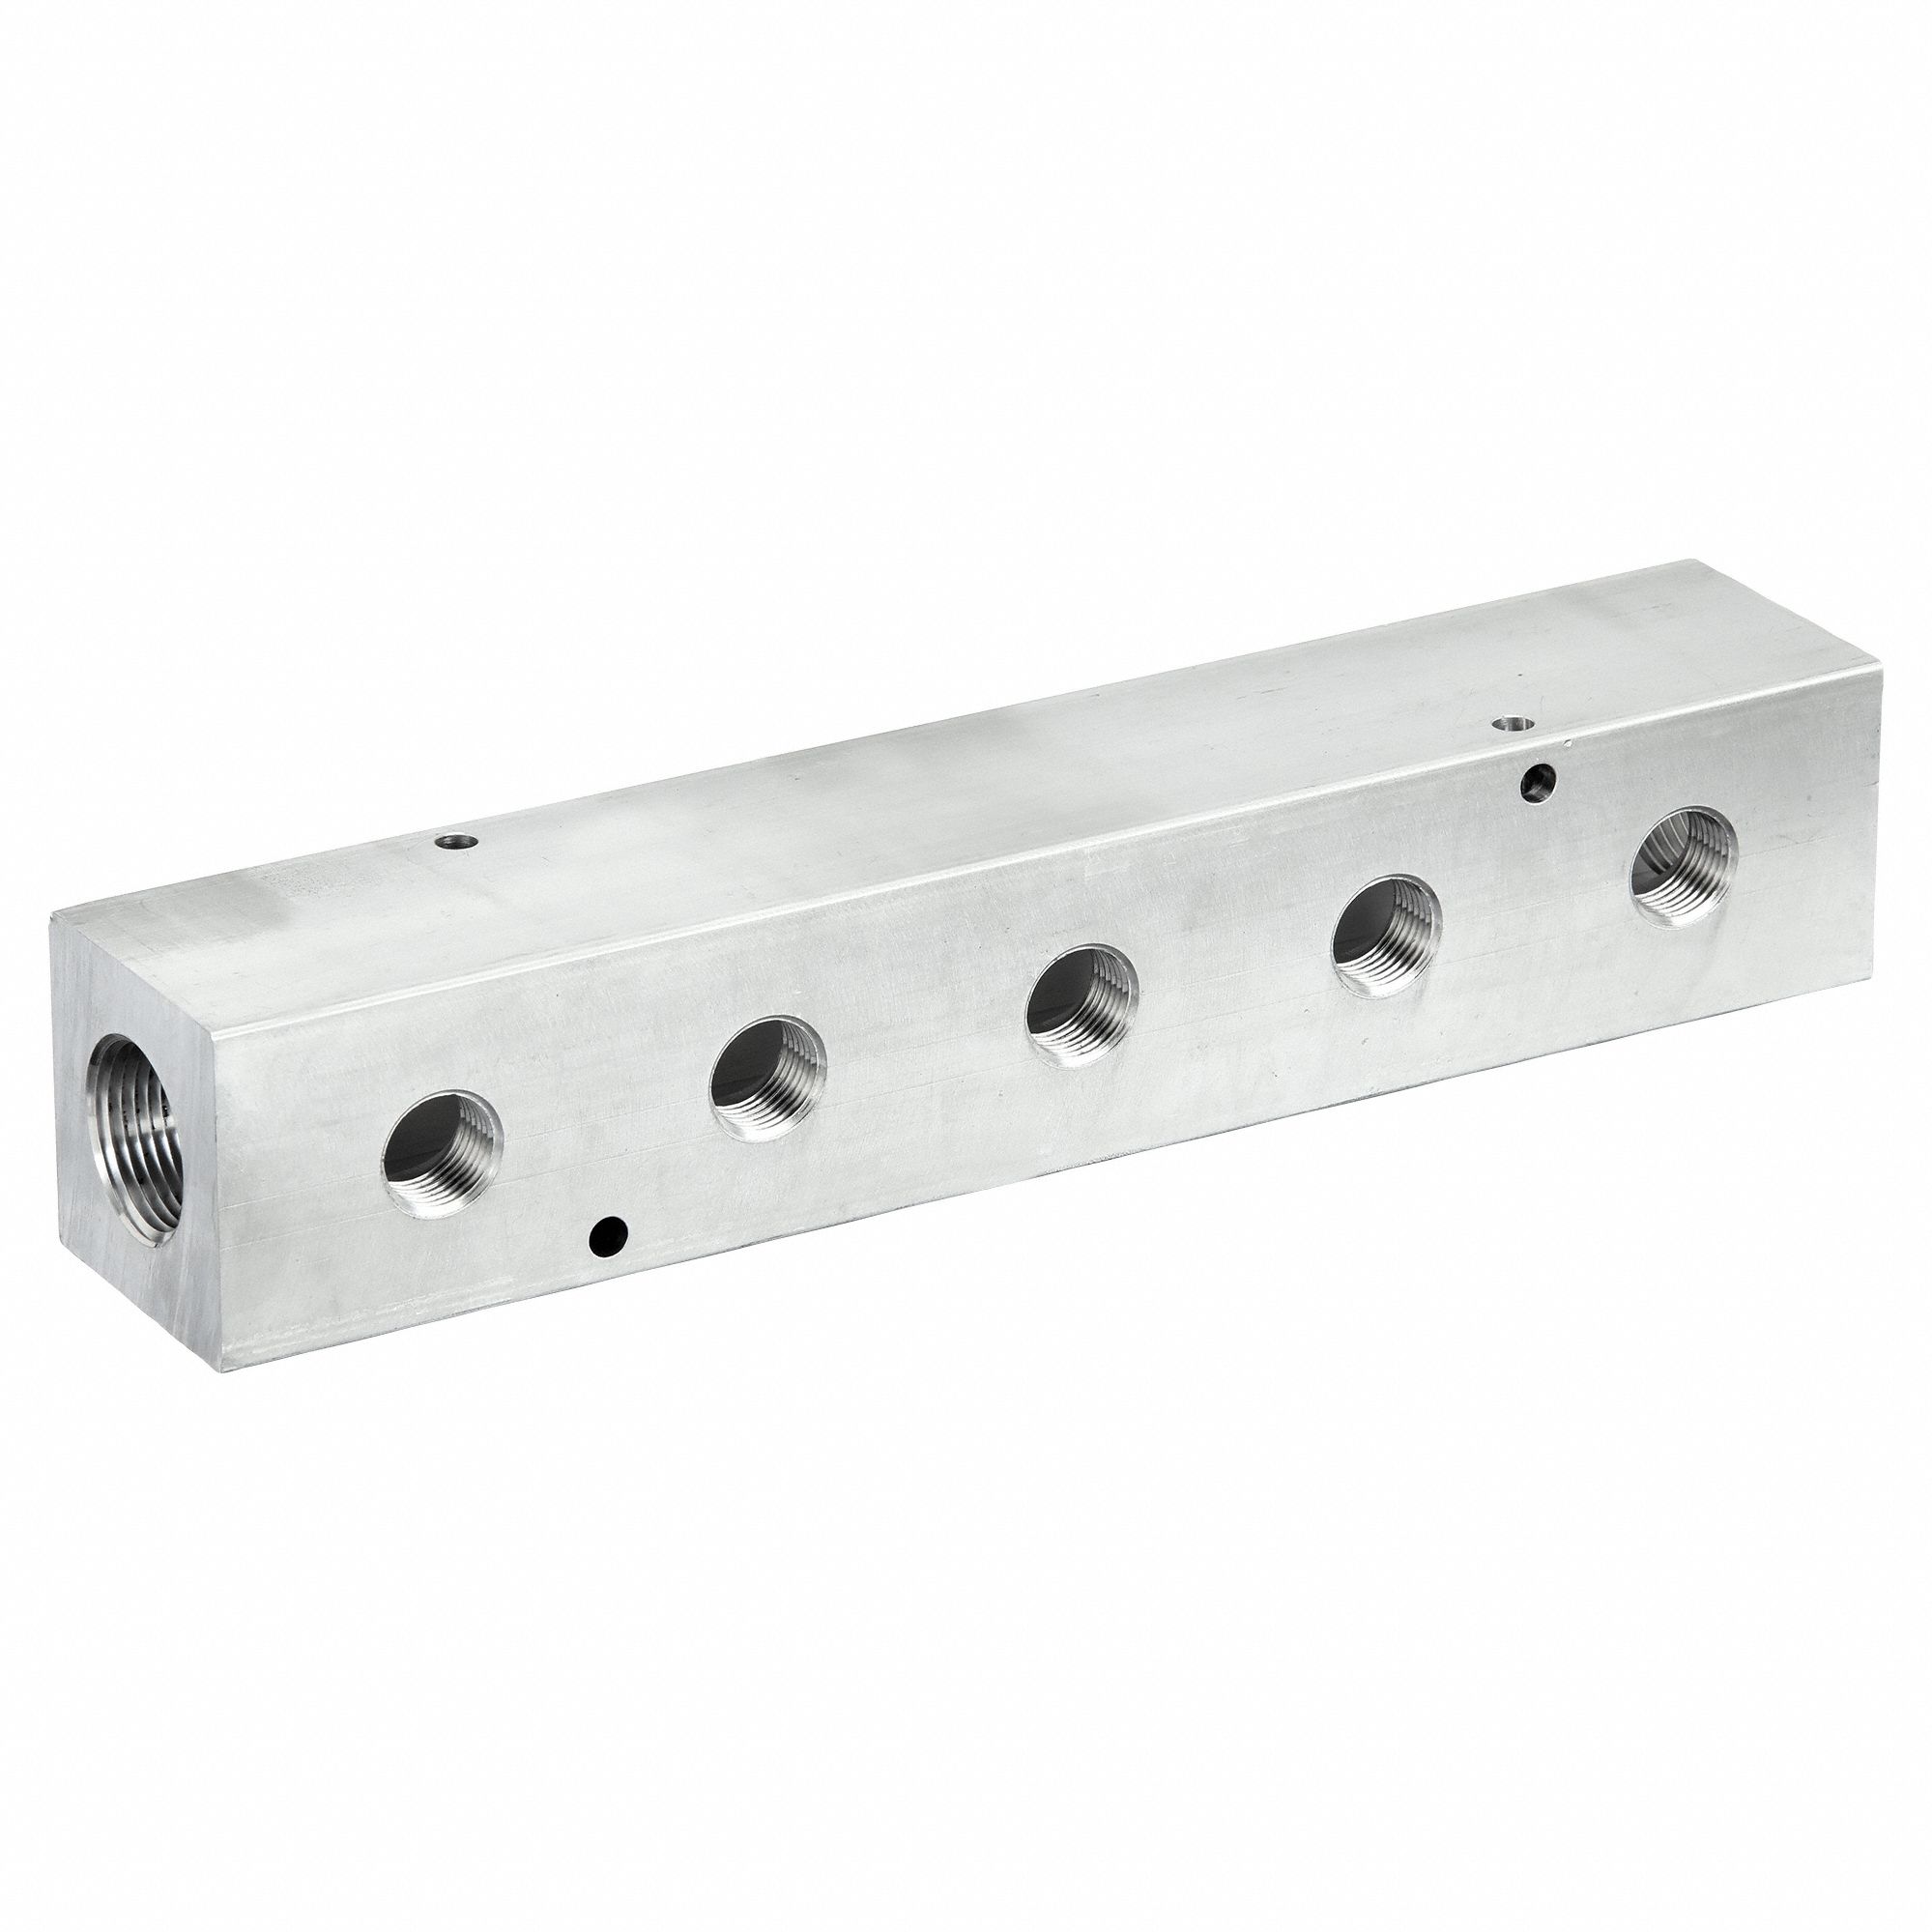 MANIFOLD,5 OUTLETS,OUTLET SIZE 1/2